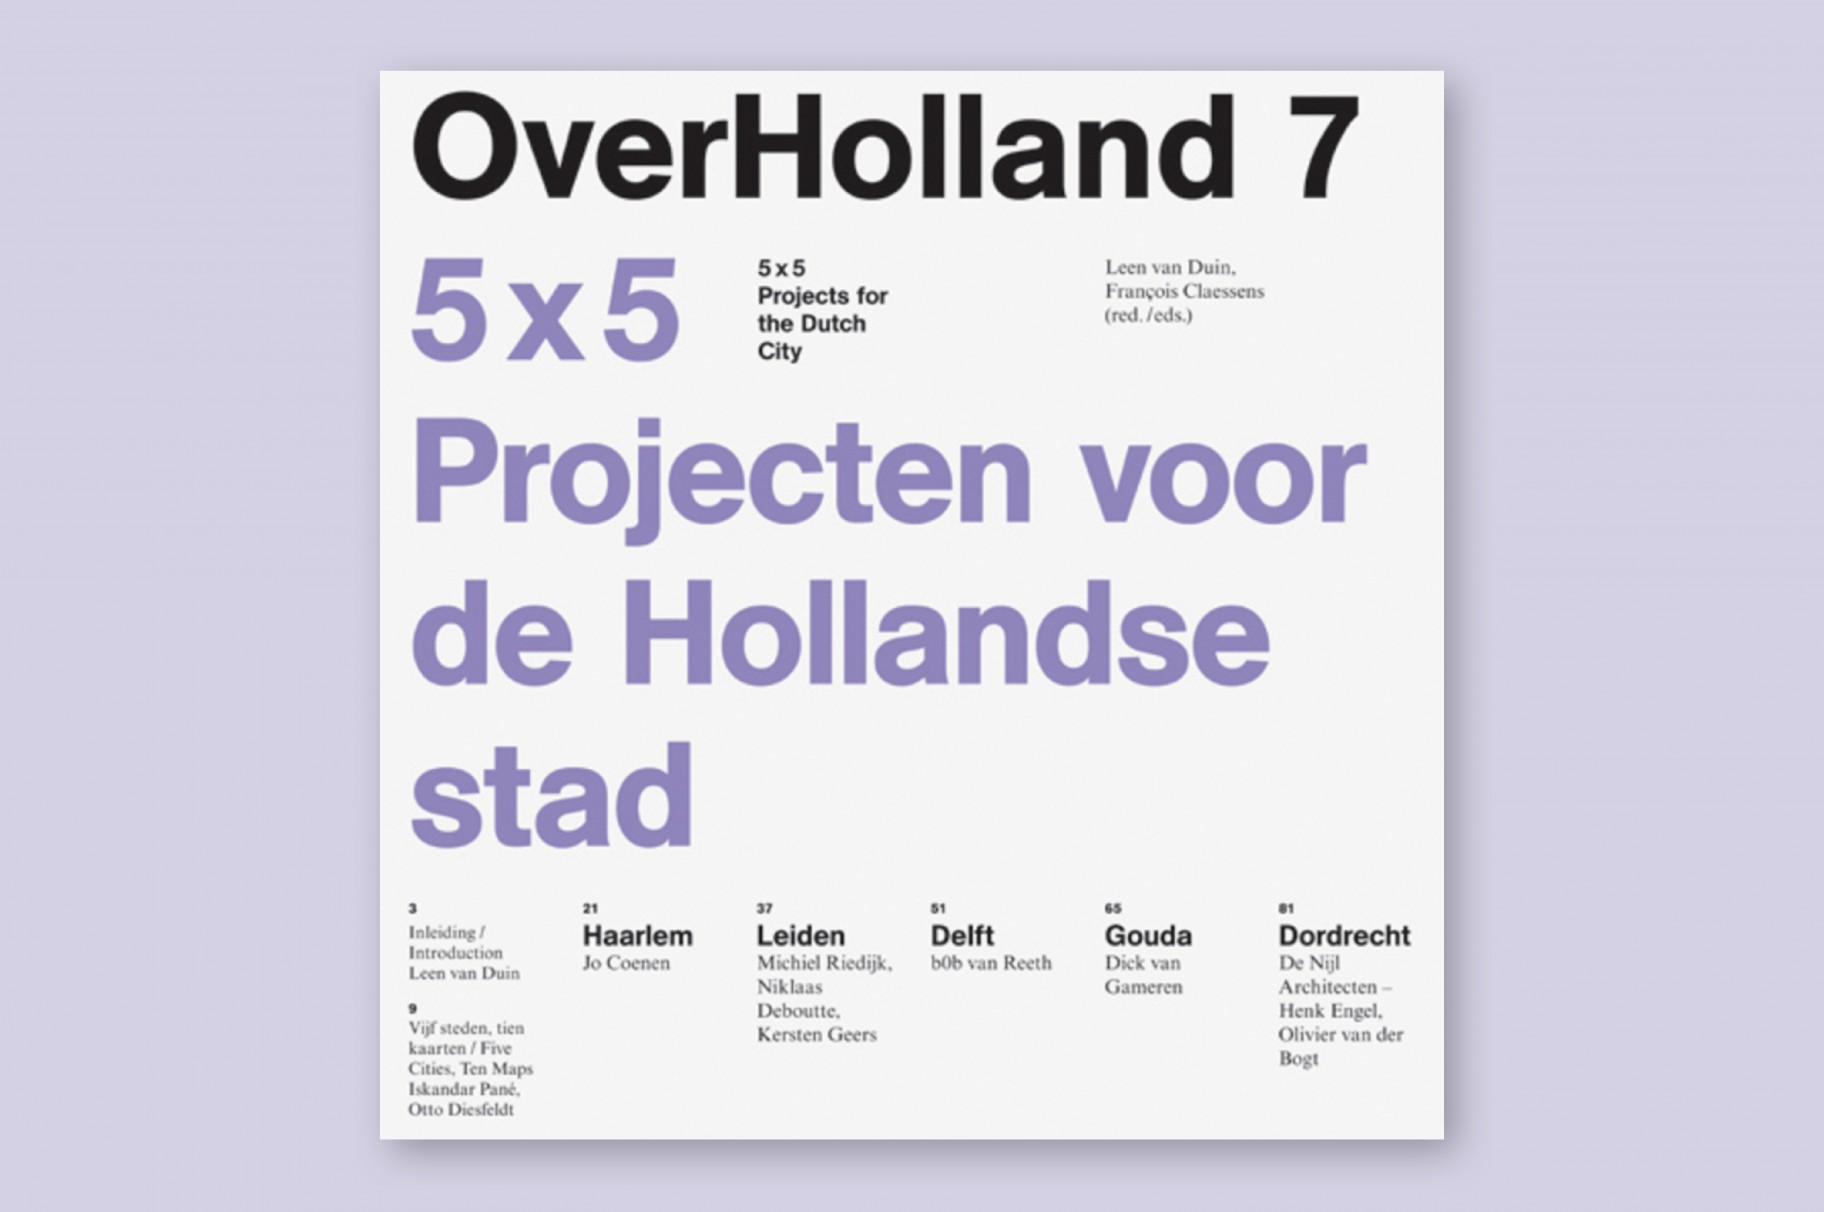 Mastaba study project in Over Holland 7